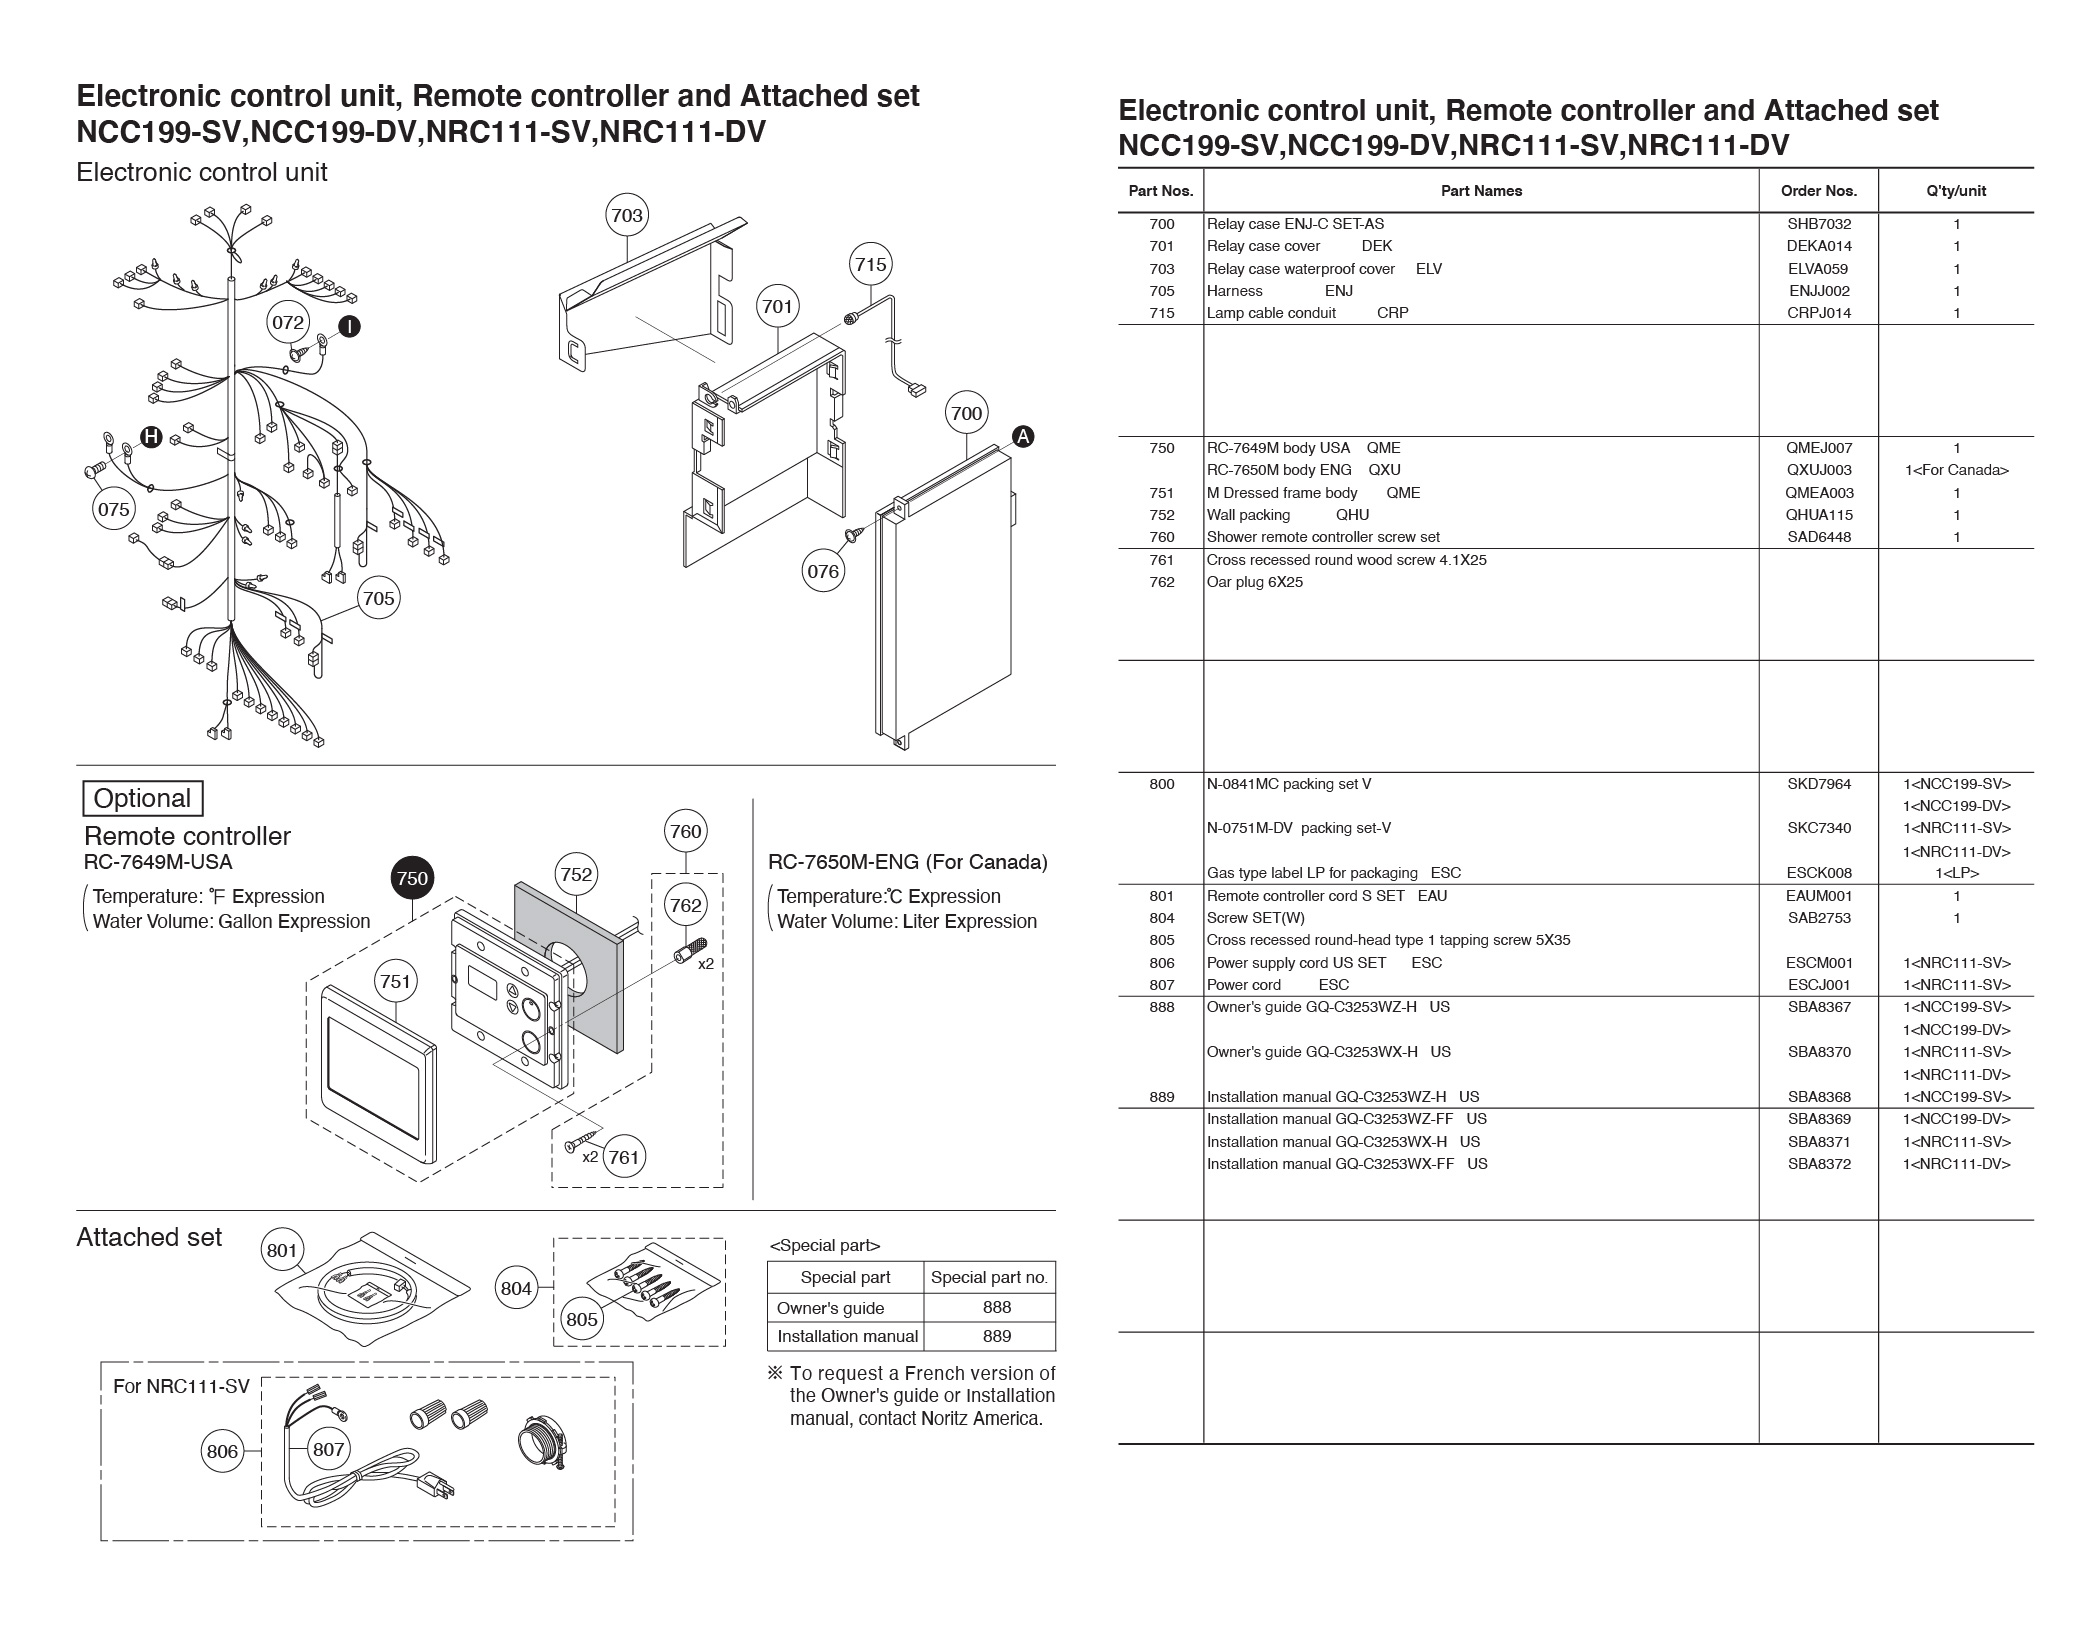 WESEARY Manuals / Datasheets / Instructions - Manuals+